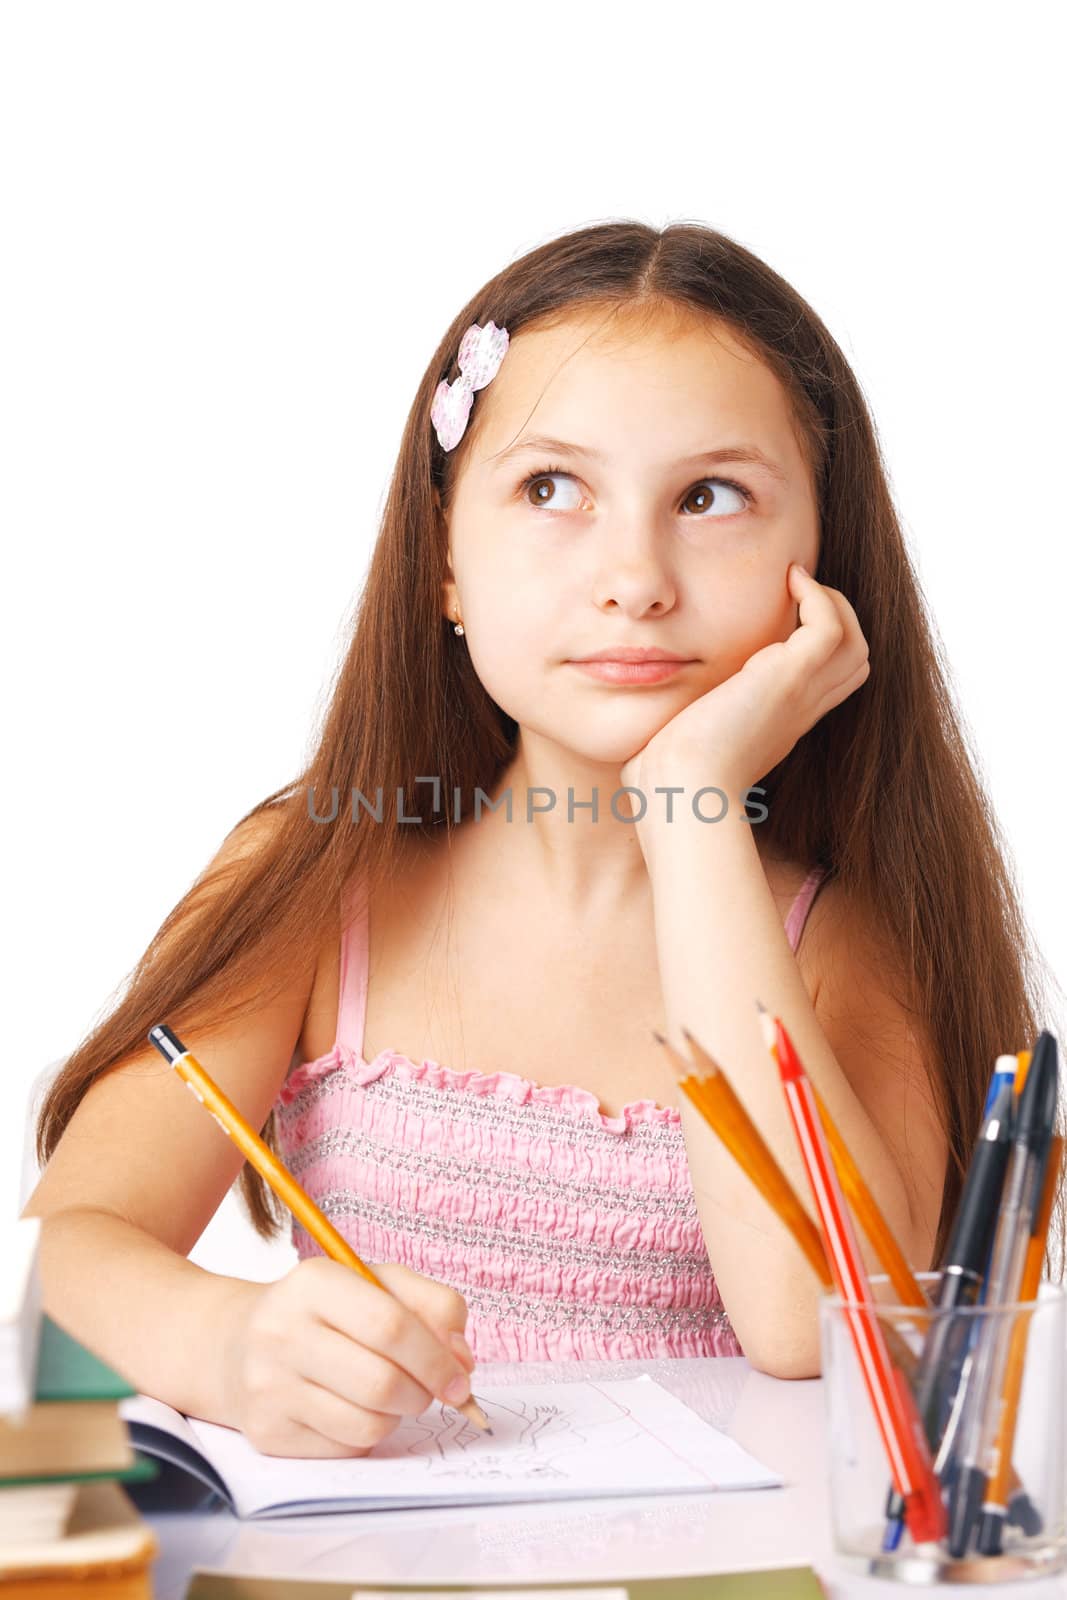 Cute little girl sketching something, holding her hand under her chin, looking away.